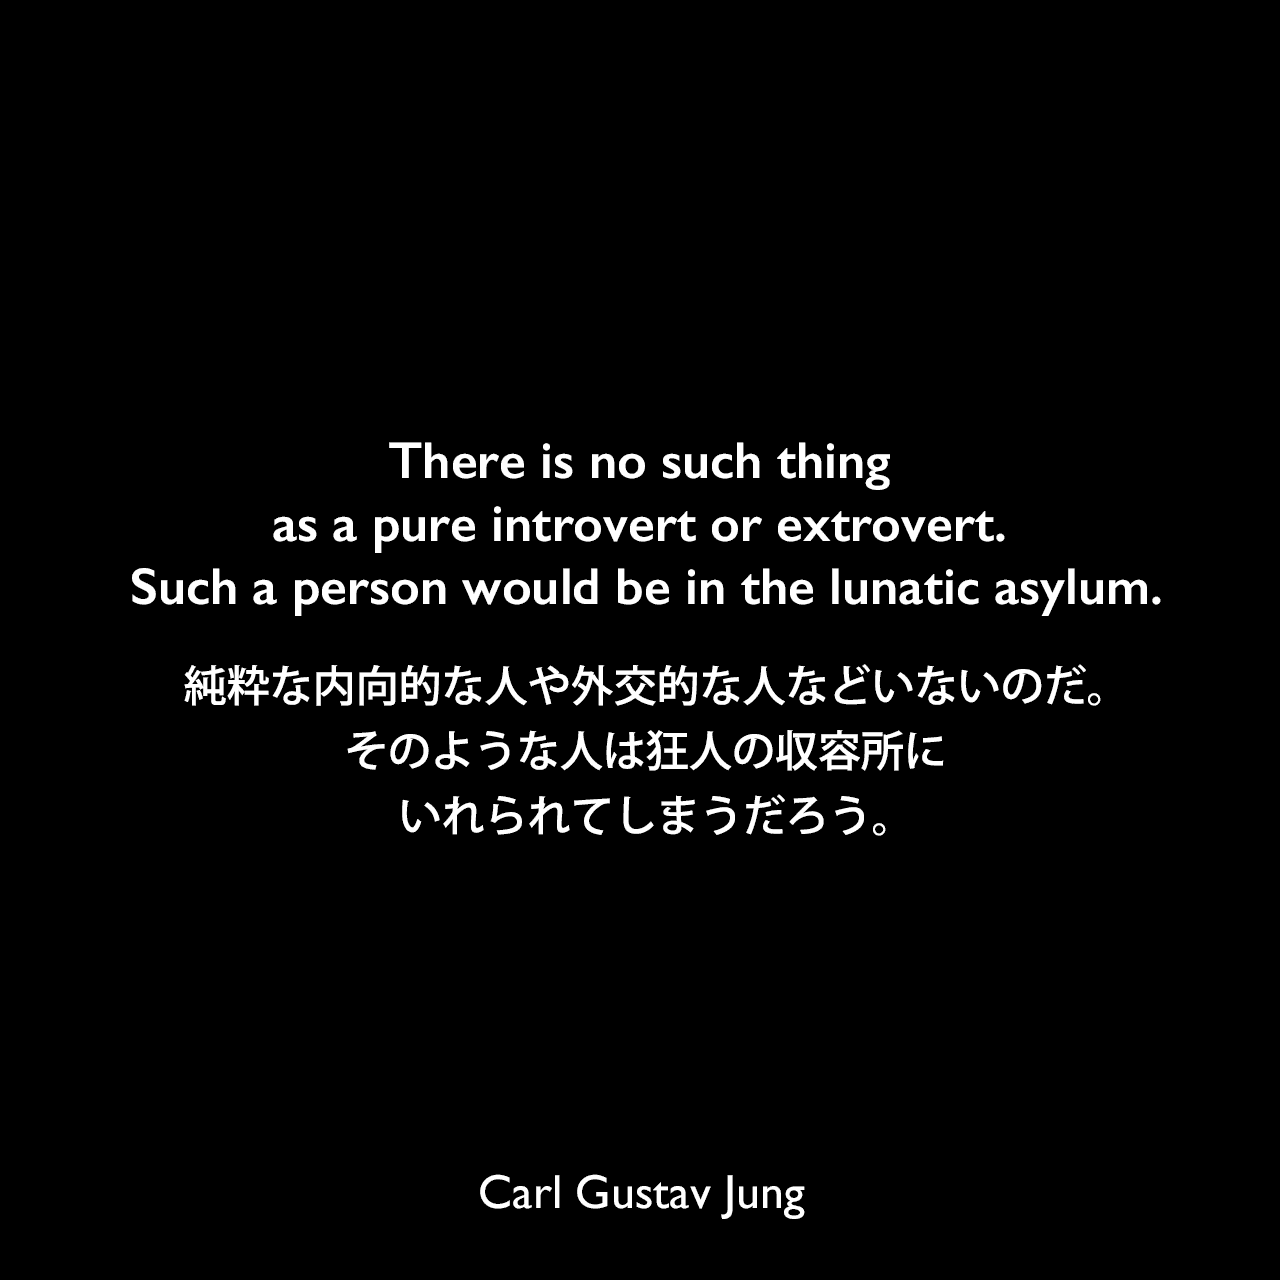 There is no such thing as a pure introvert or extrovert. Such a person would be in the lunatic asylum.純粋な内向的な人や外交的な人などいないのだ。そのような人は狂人の収容所にいれられてしまうだろう。Carl Gustav Jung